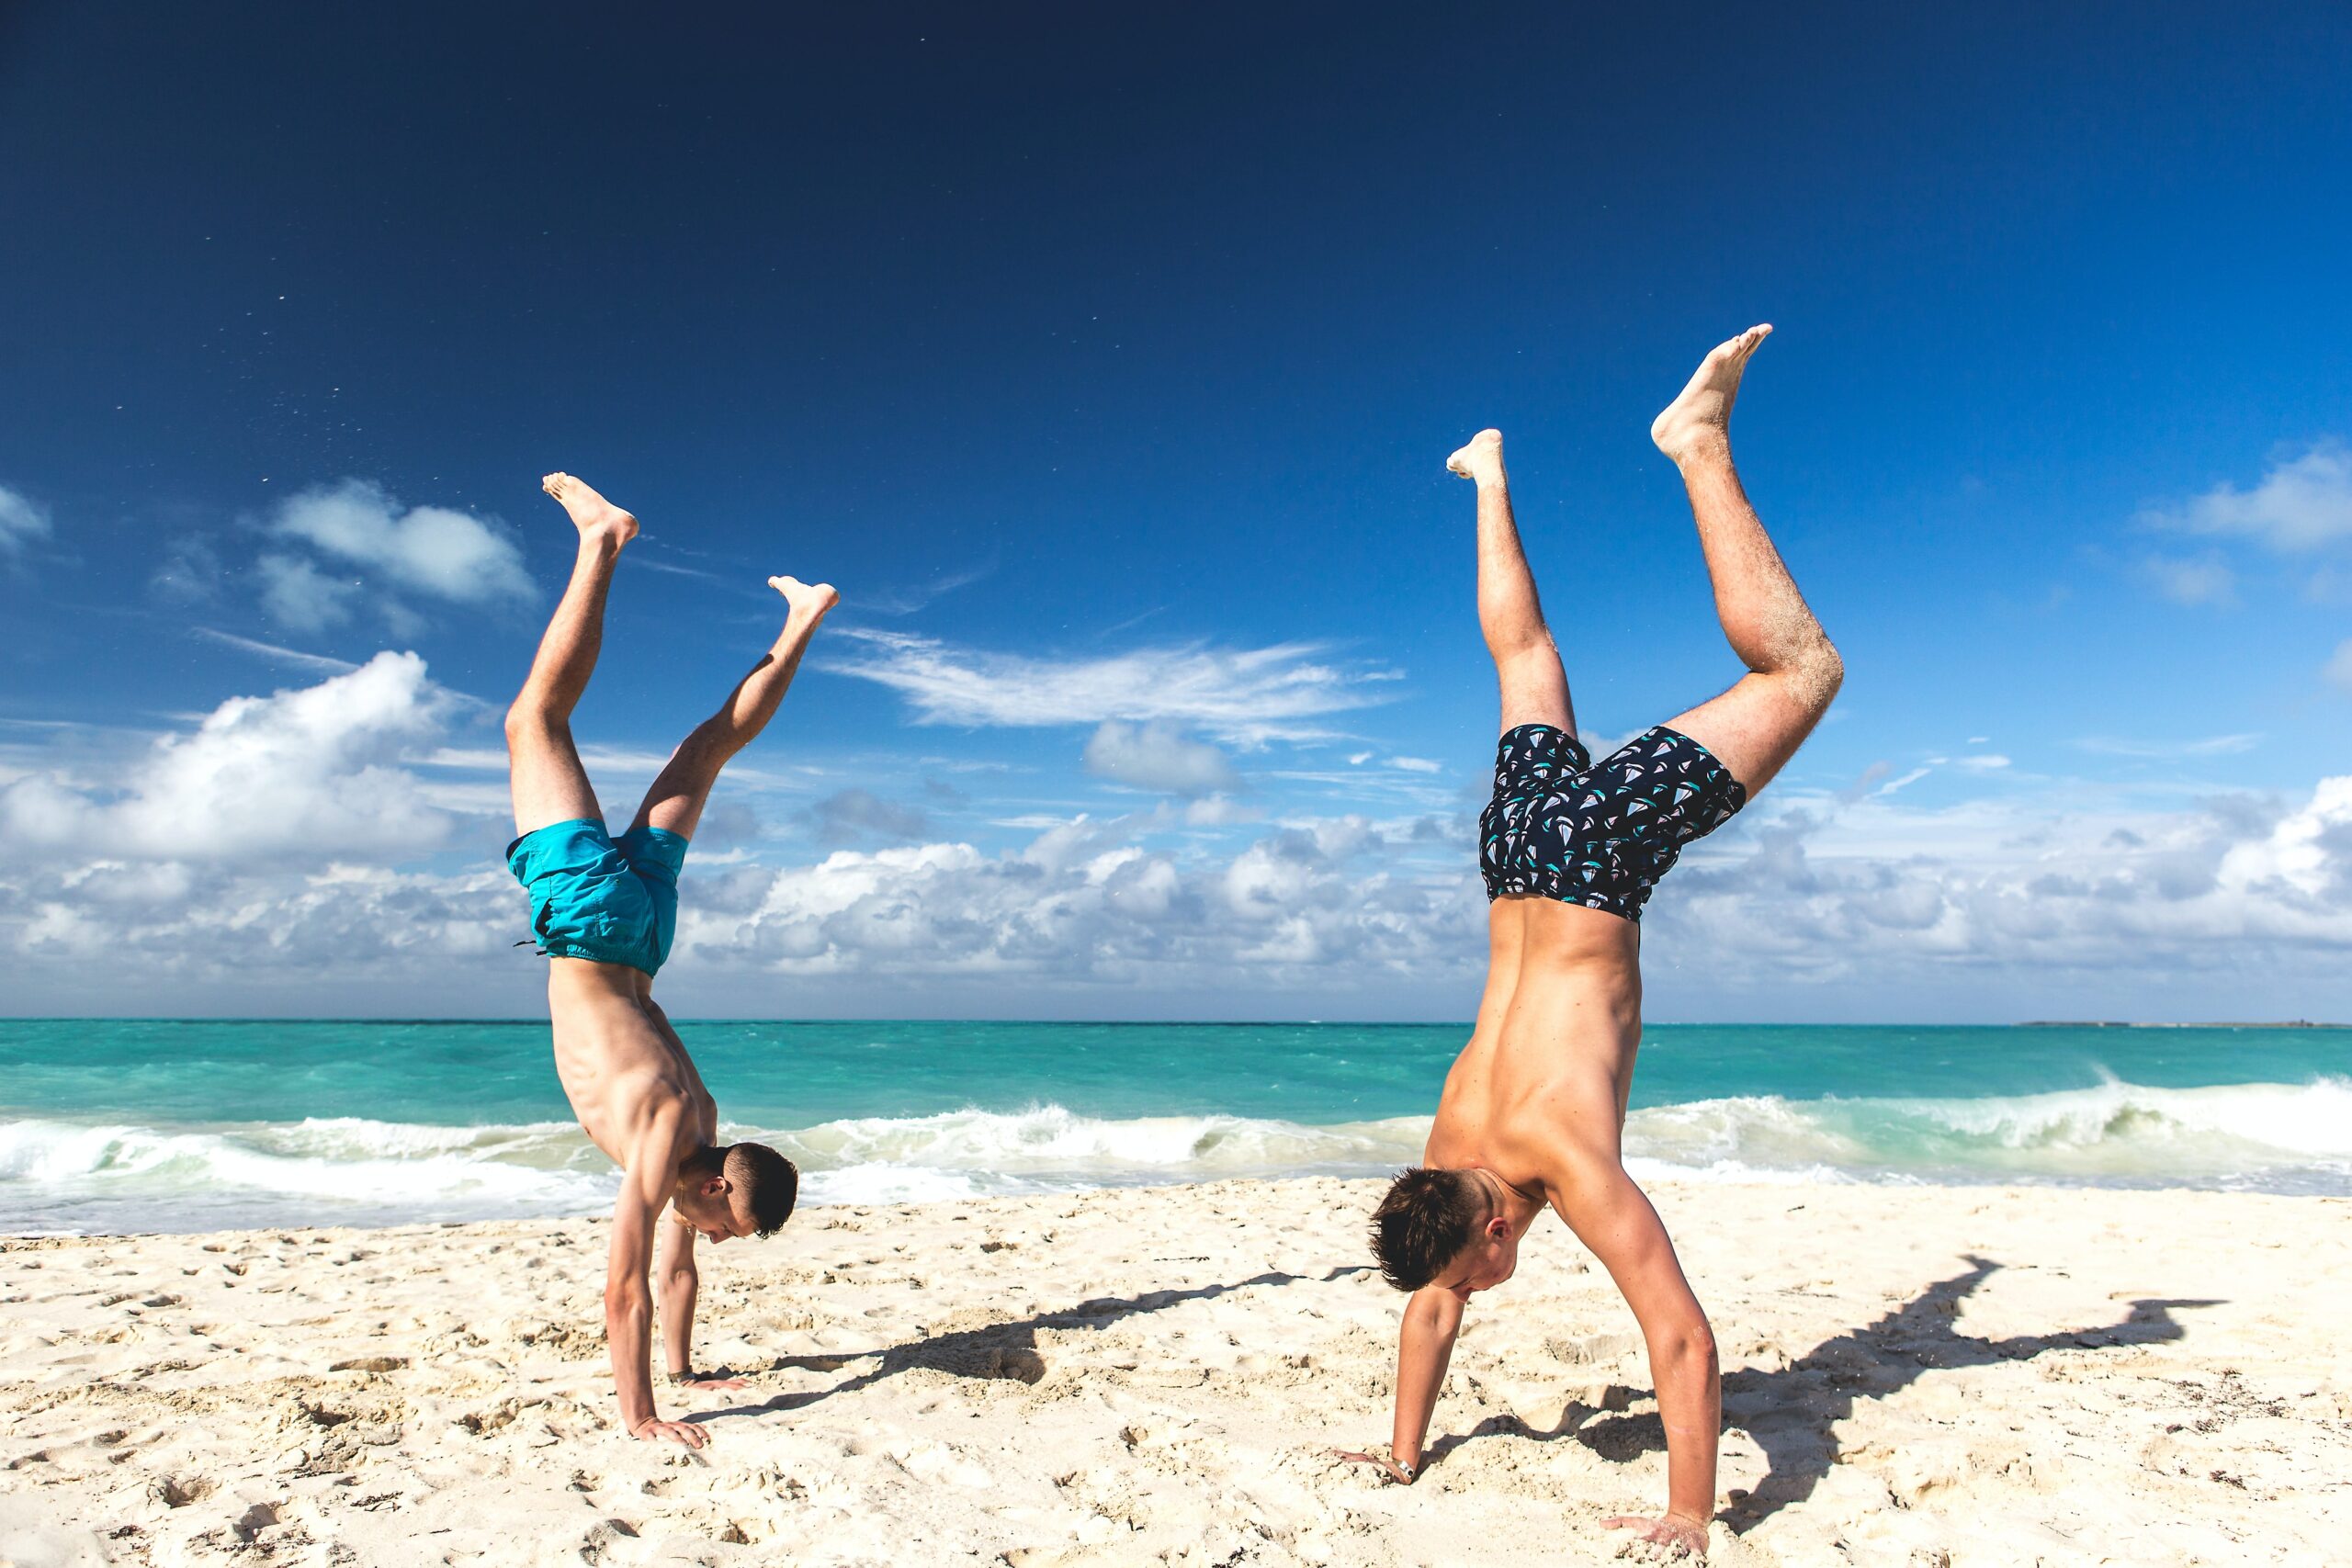 Two men doing a handstand on a beach in Cuba